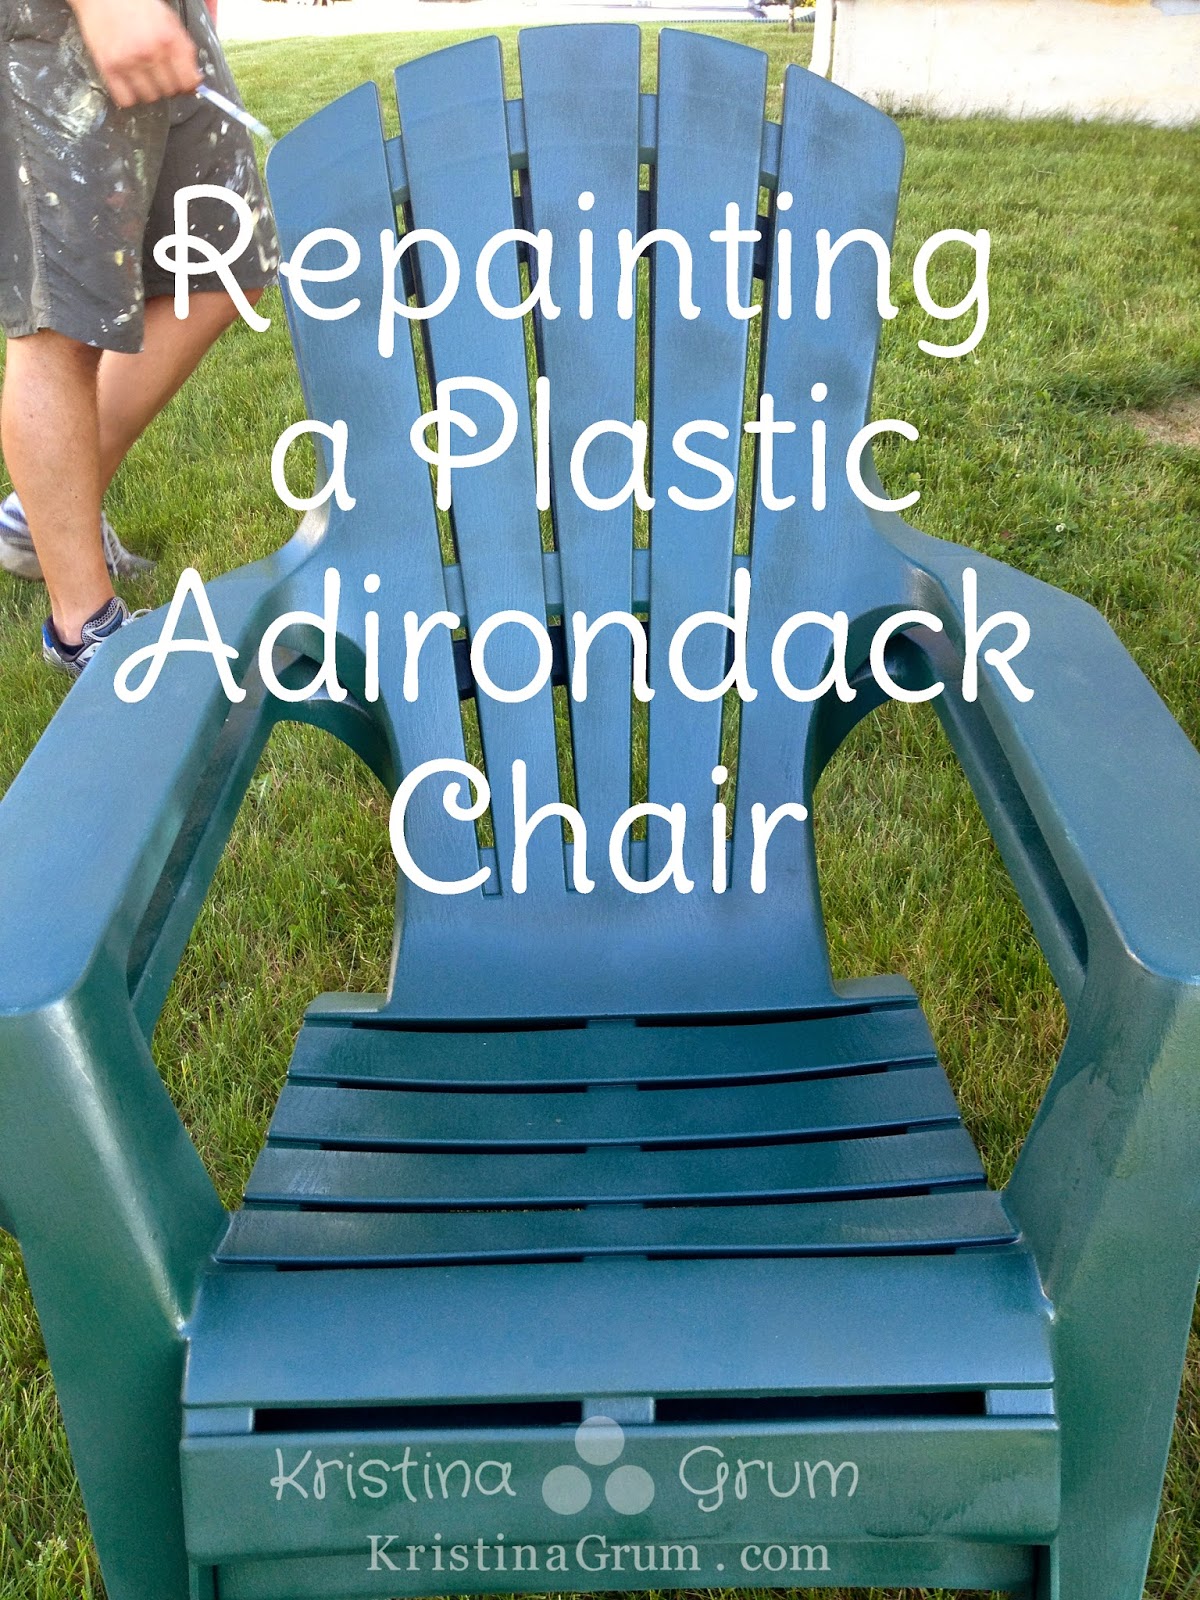 in may we were getting ready to put our adirondack chairs out in the 